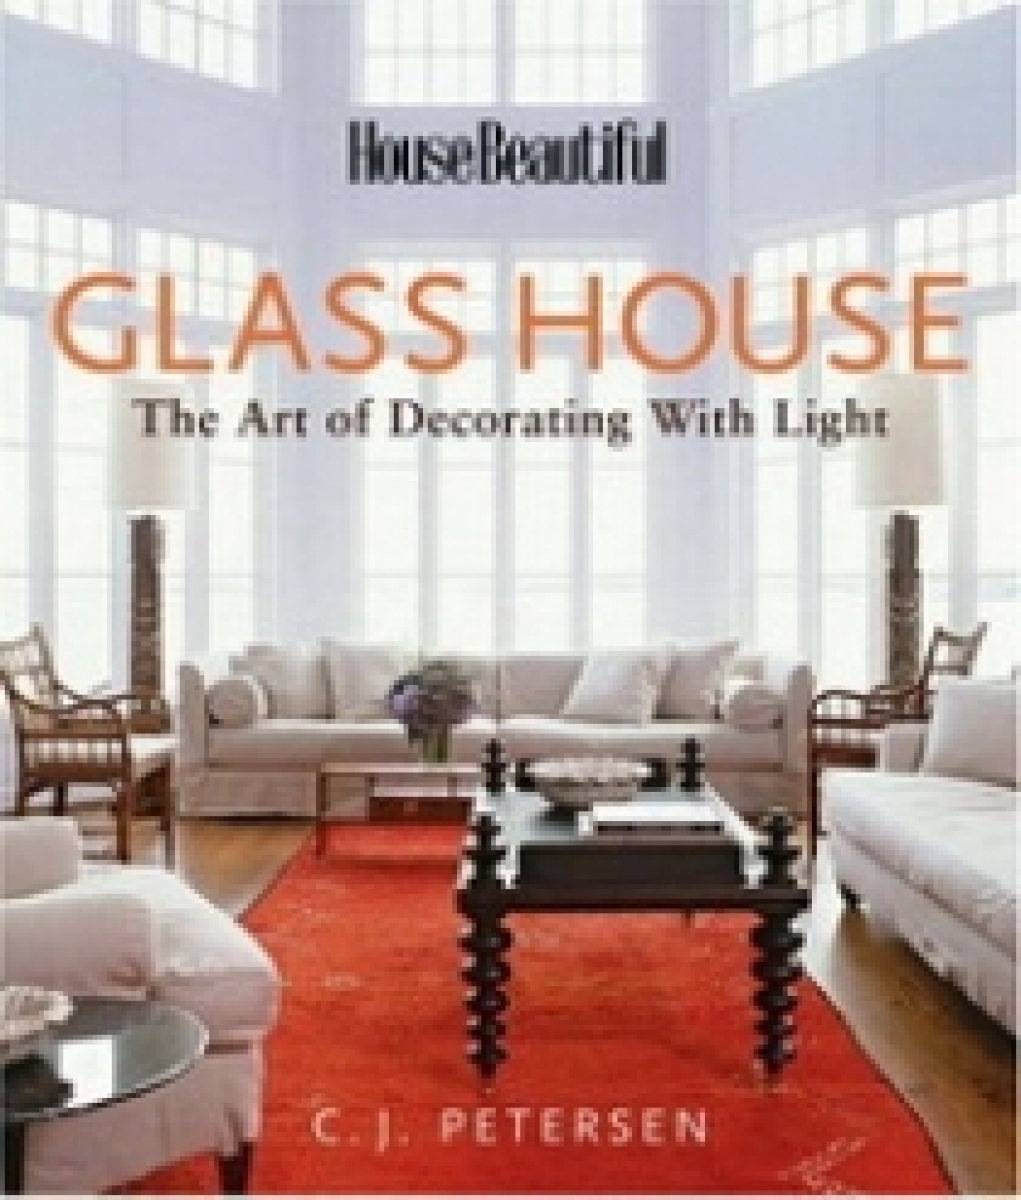 C J.P. Glass House. The Art of Decorating with Light 